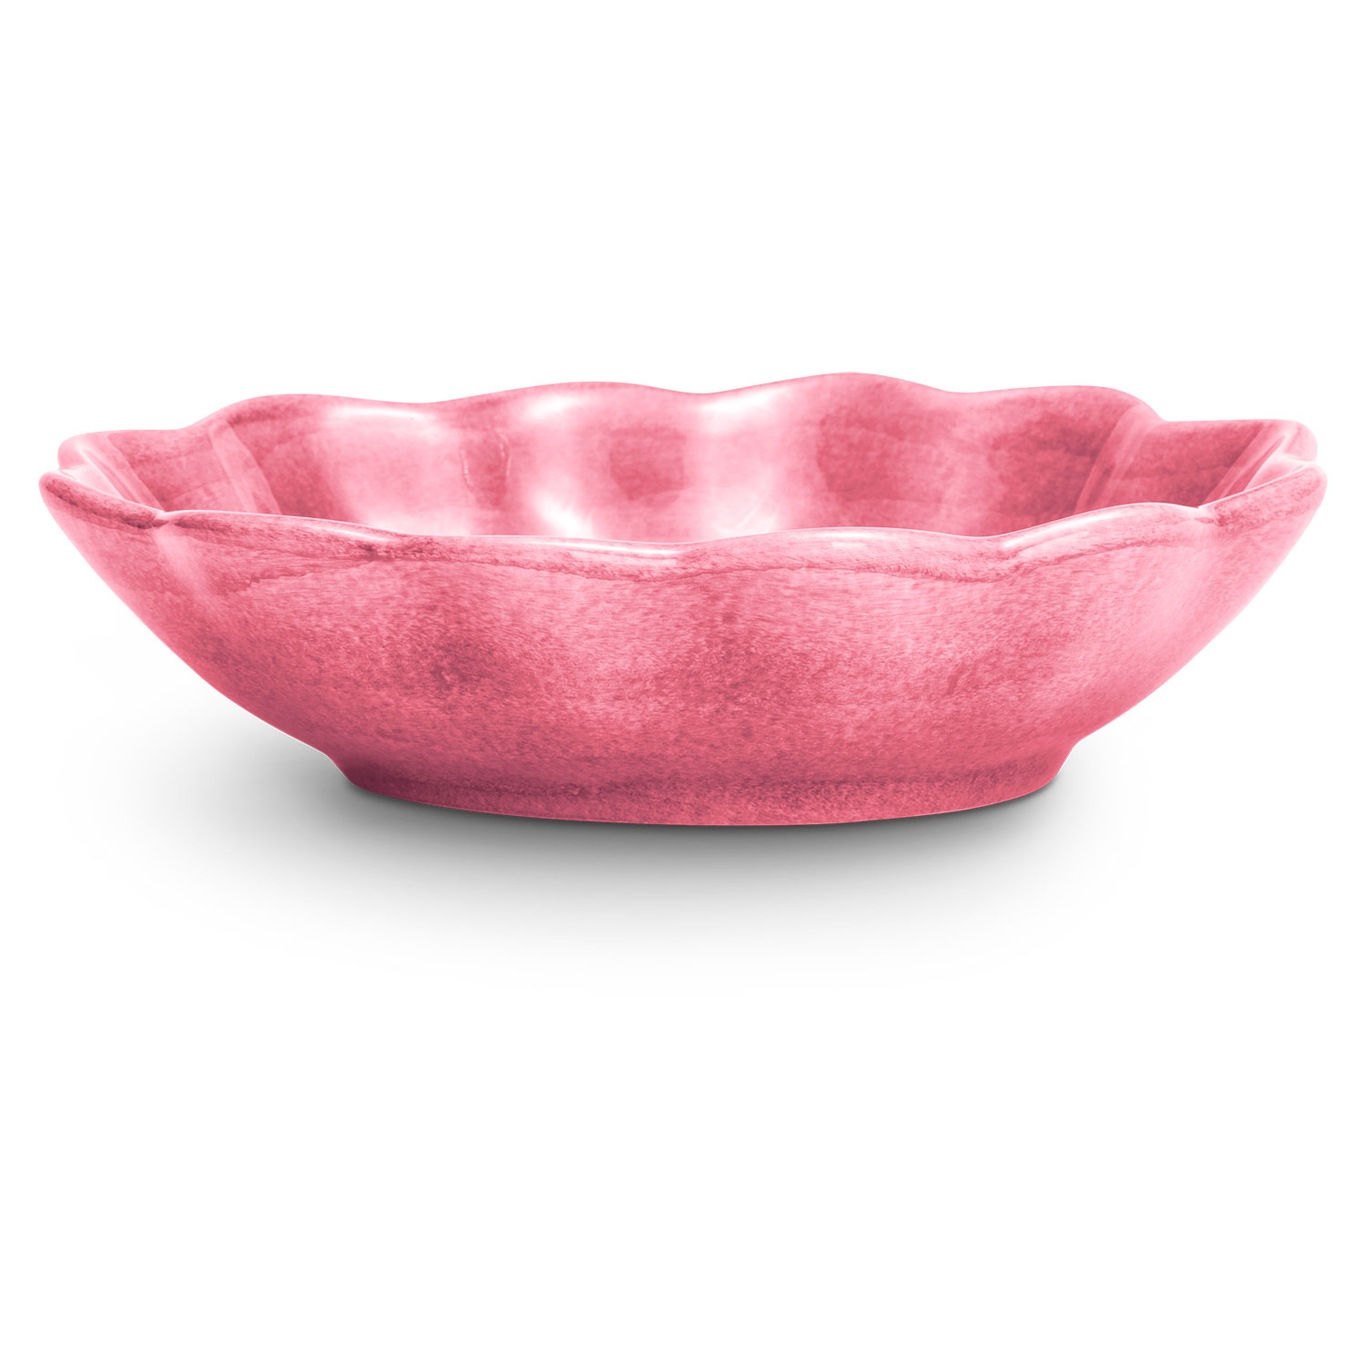 Oyster Bowl 16x18 cm, Pink